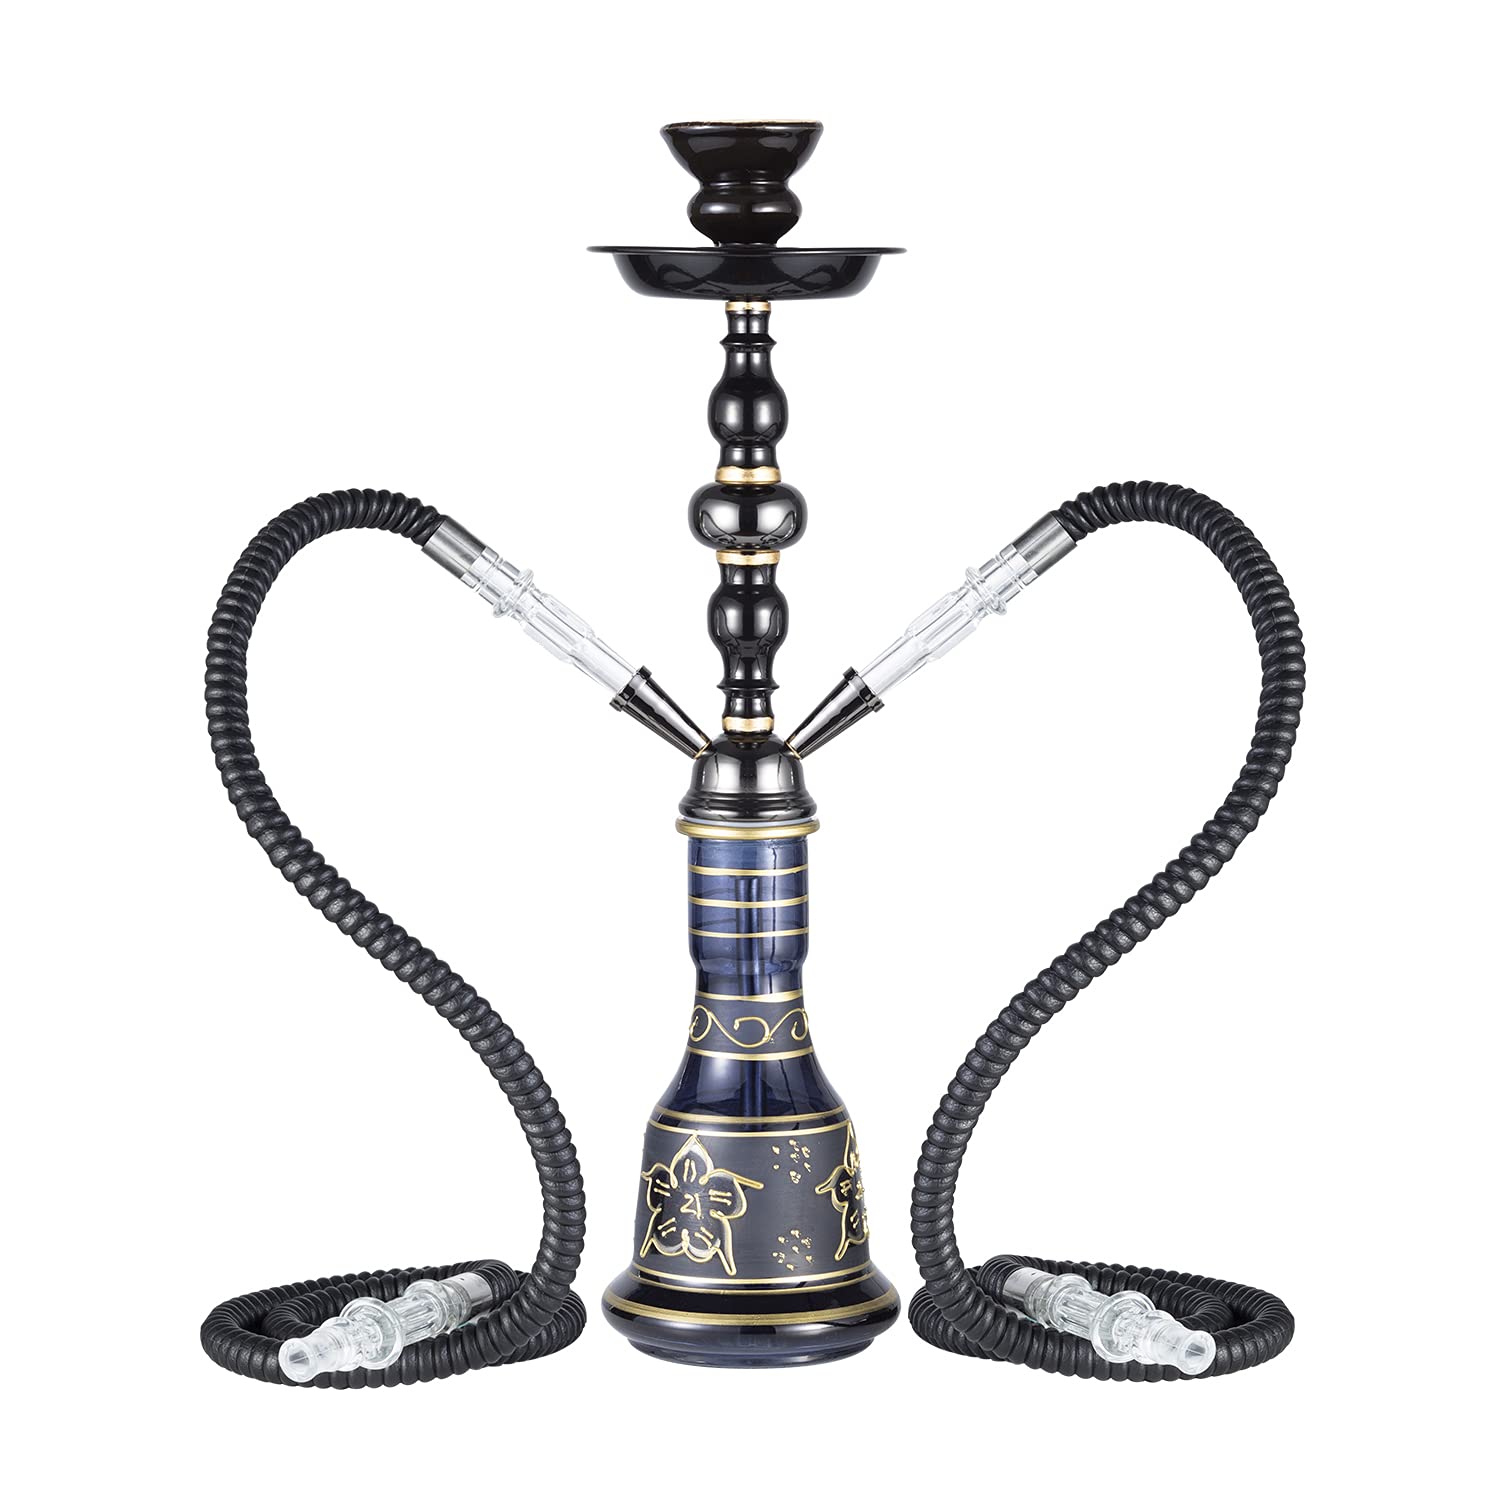 All Hookah Products